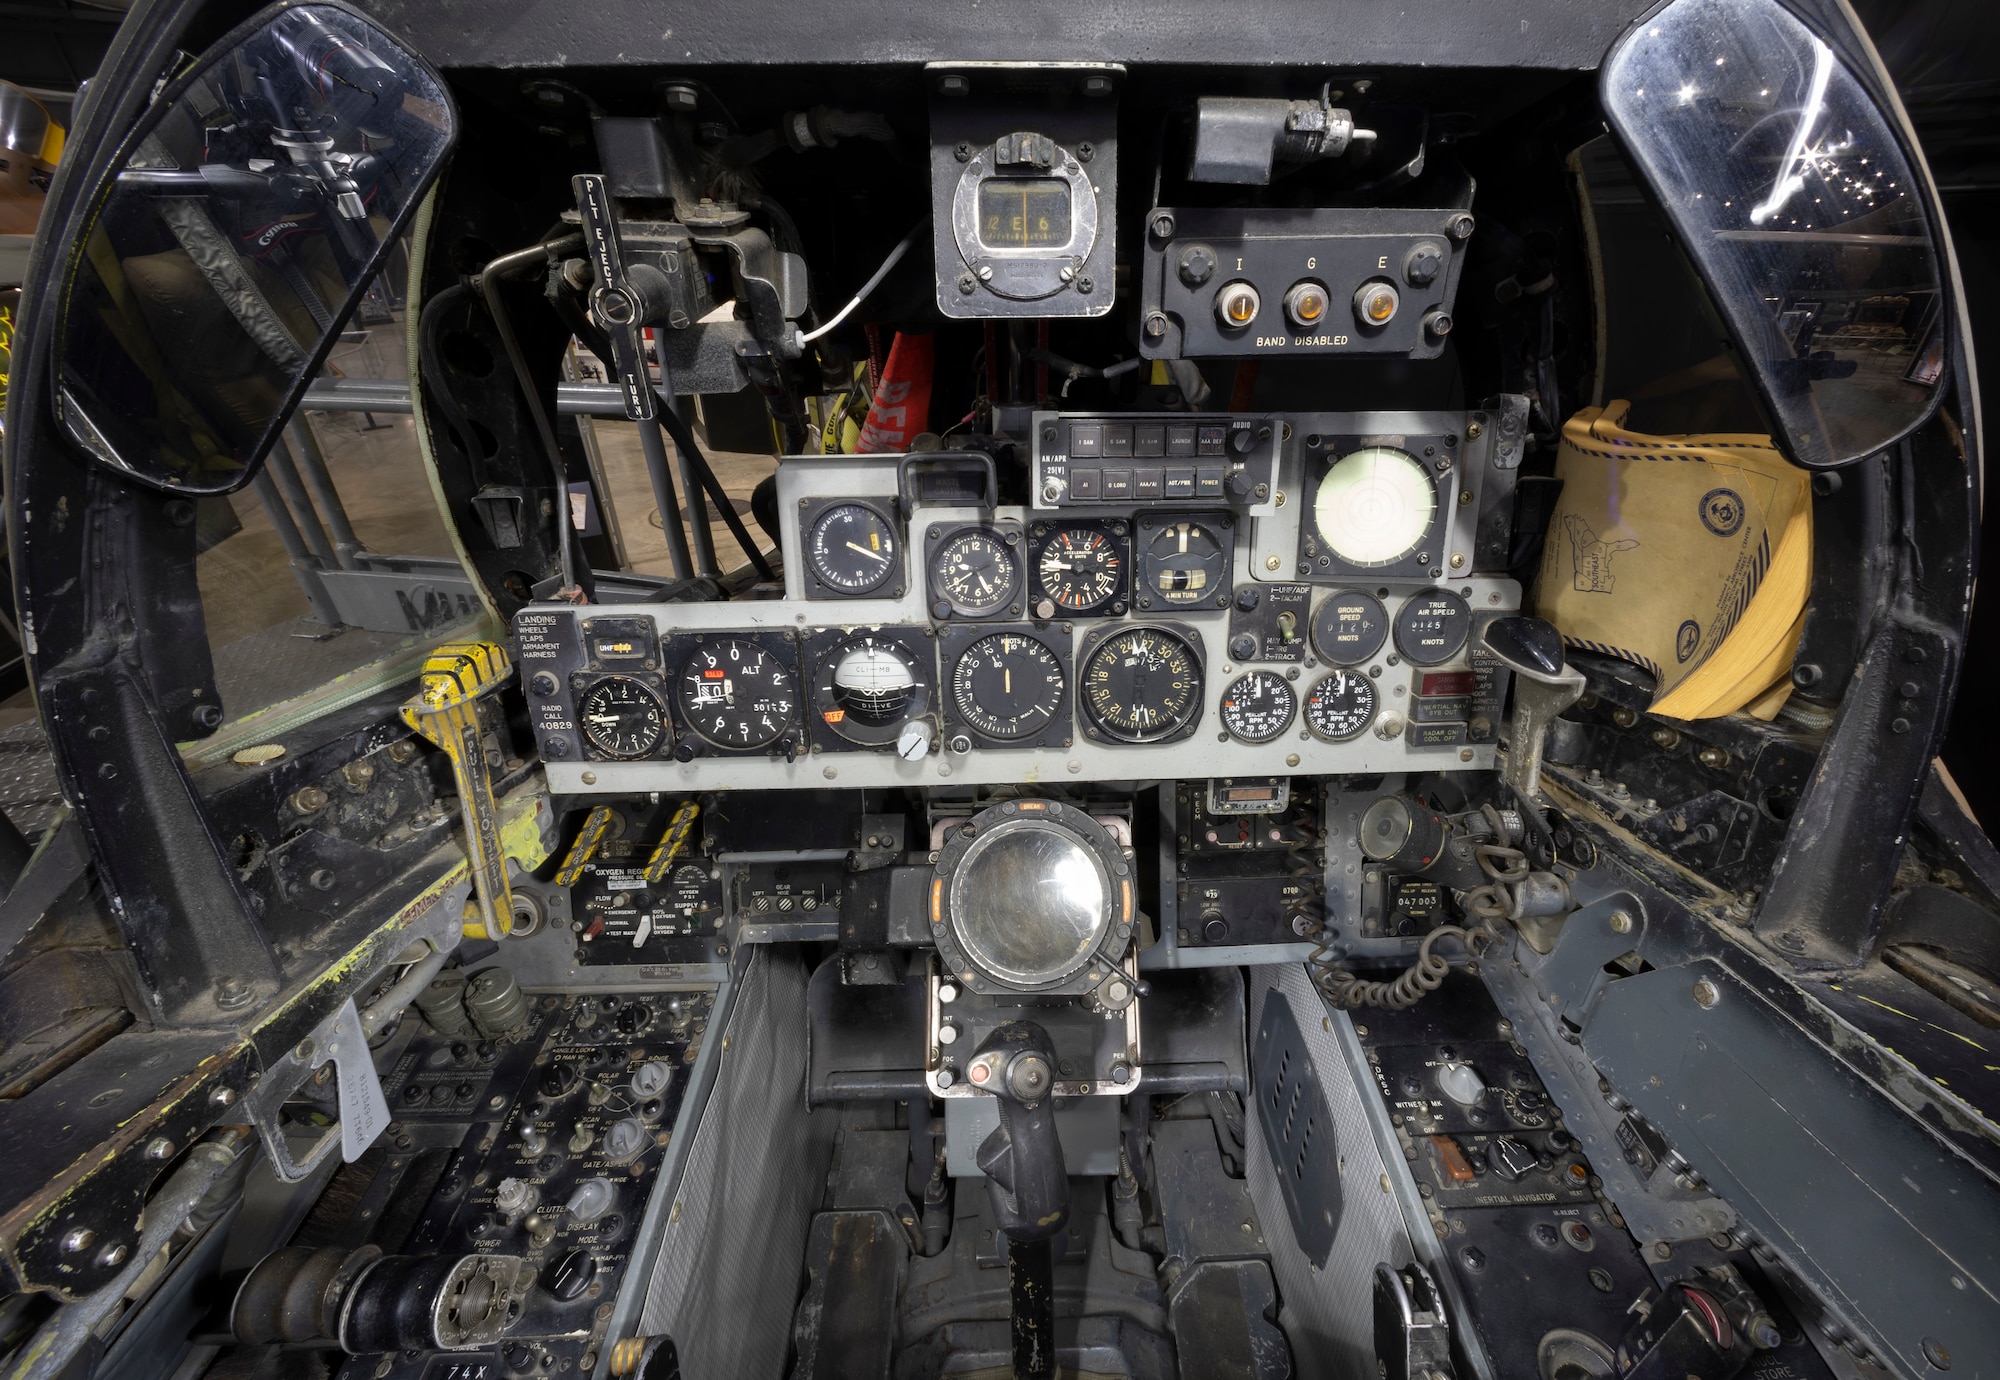 Weapon systems Officer's cockpit view of the McDonnel Douglas F-4C Phantom II.